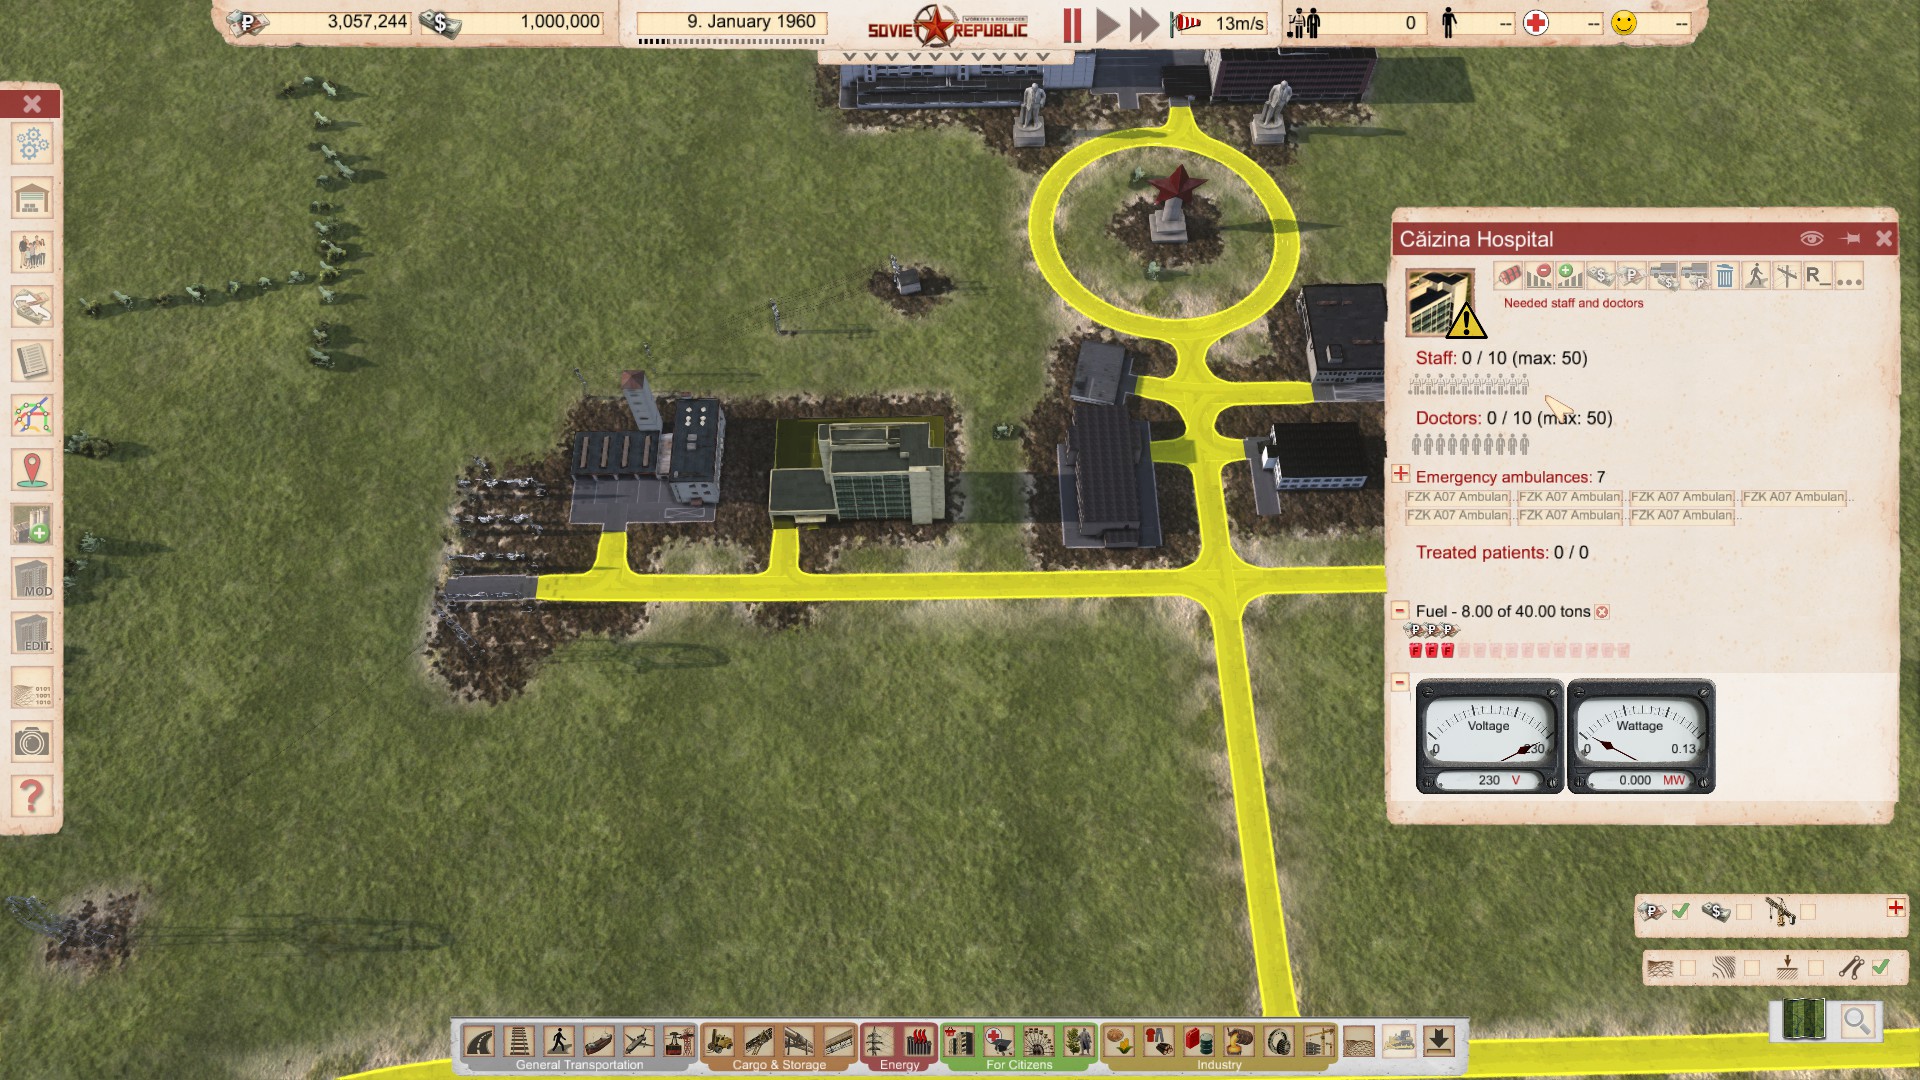 Workers & Resources: Soviet Republic - Tips How to Make Money in Game - Utility Building - 7220342